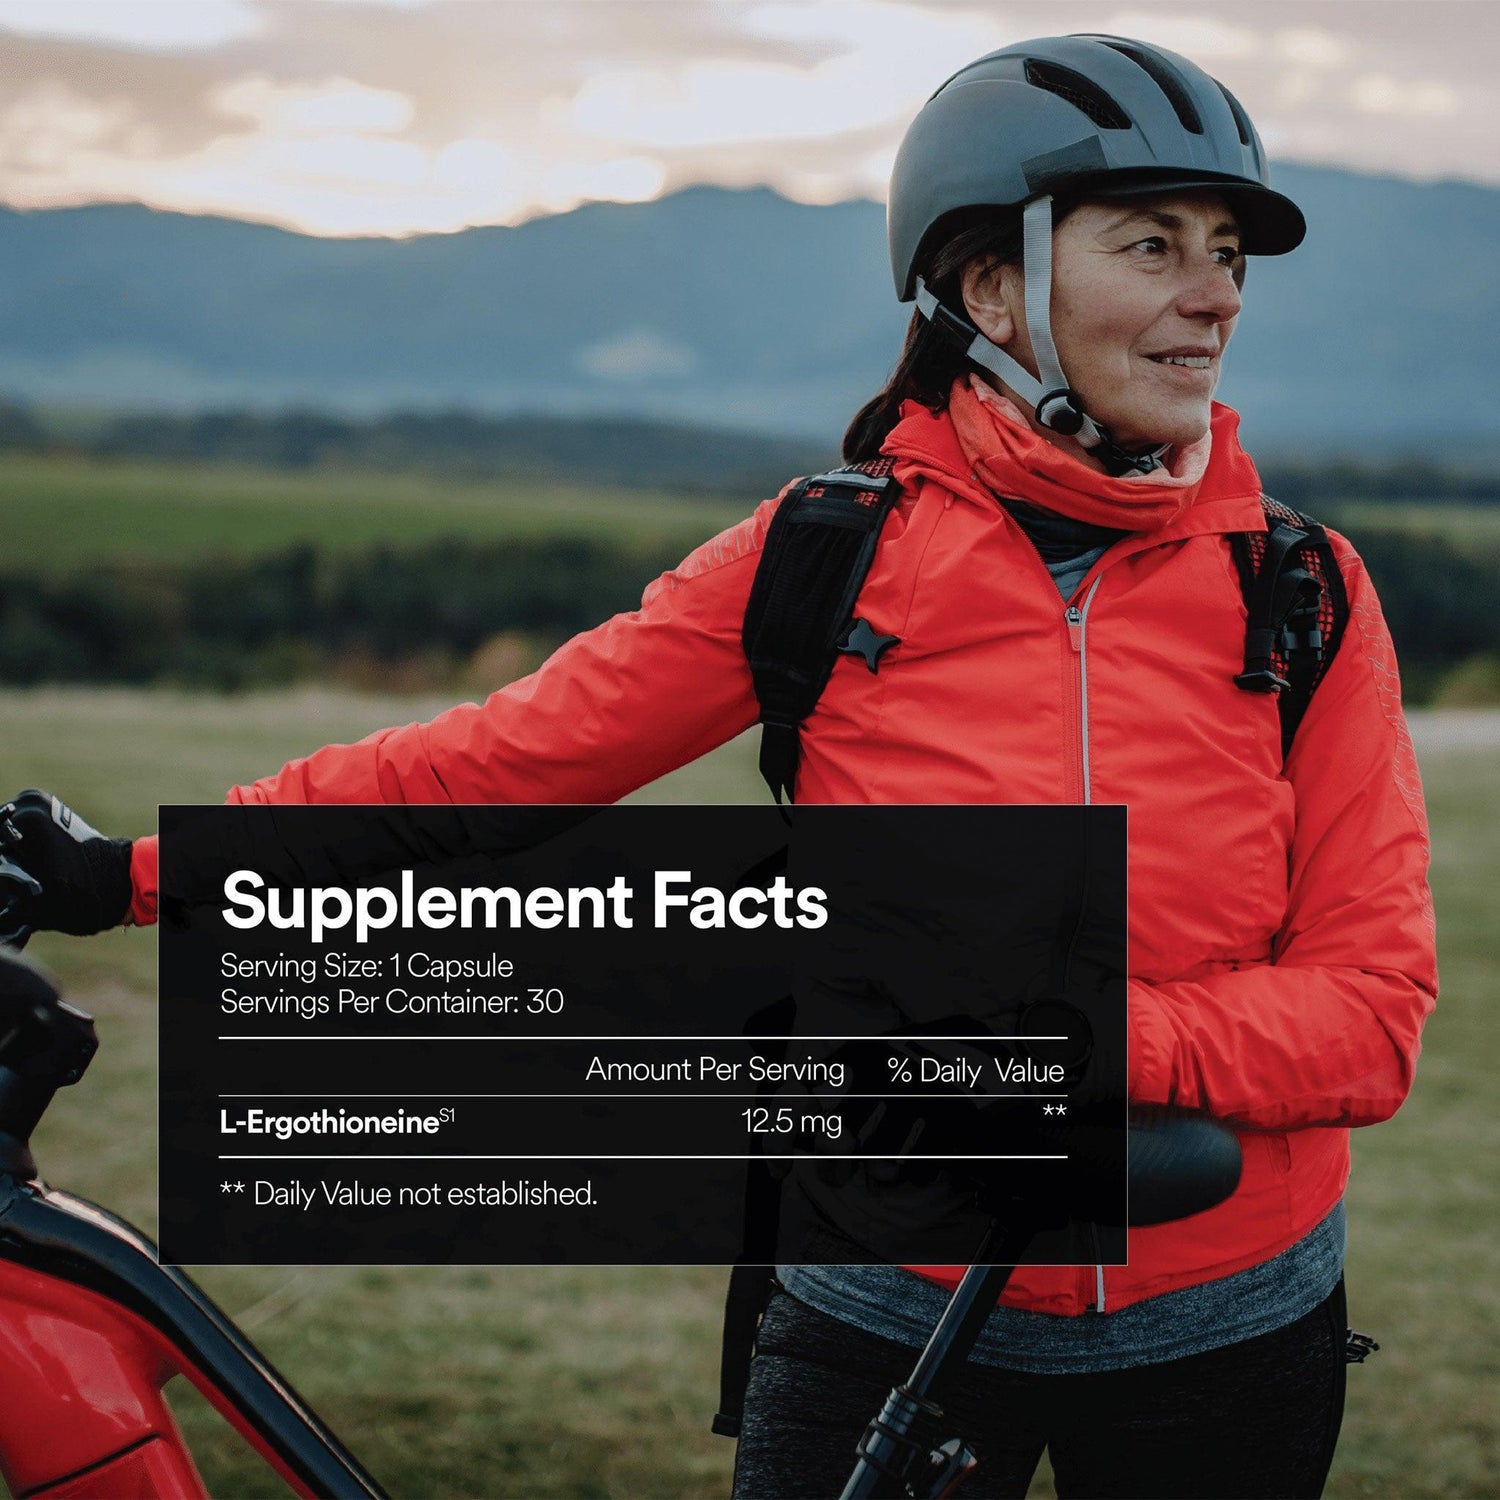 Fitties FitProtect supplement facts detail